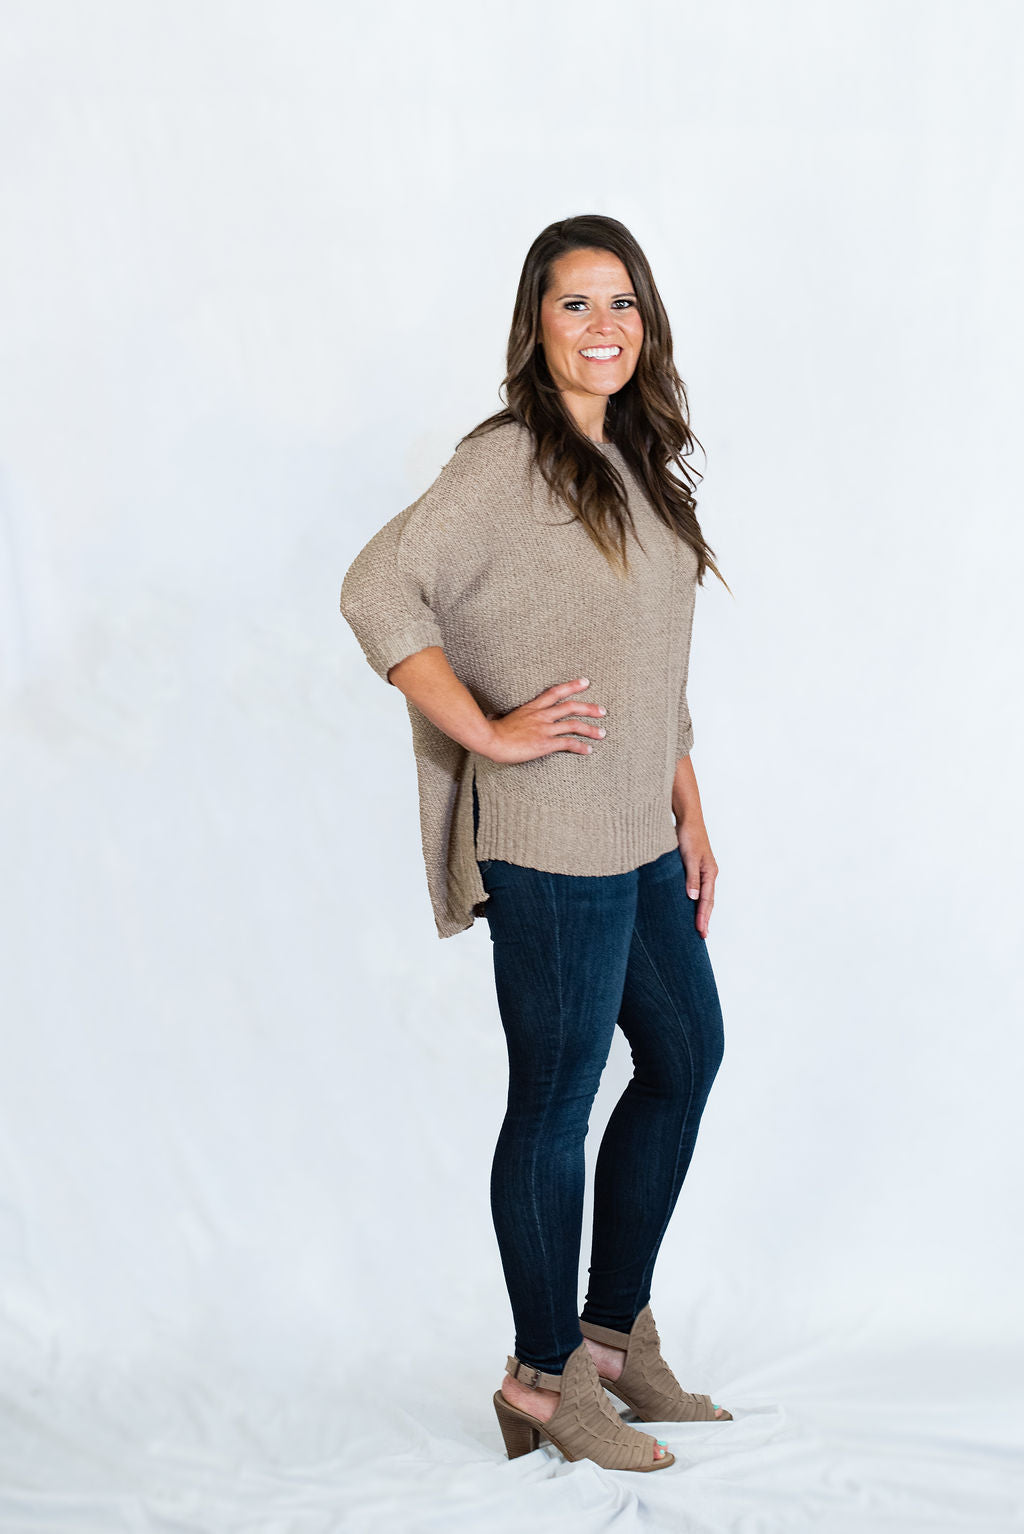 It’s A Breeze Tunic Sweater Knit Top by Easel Clothing